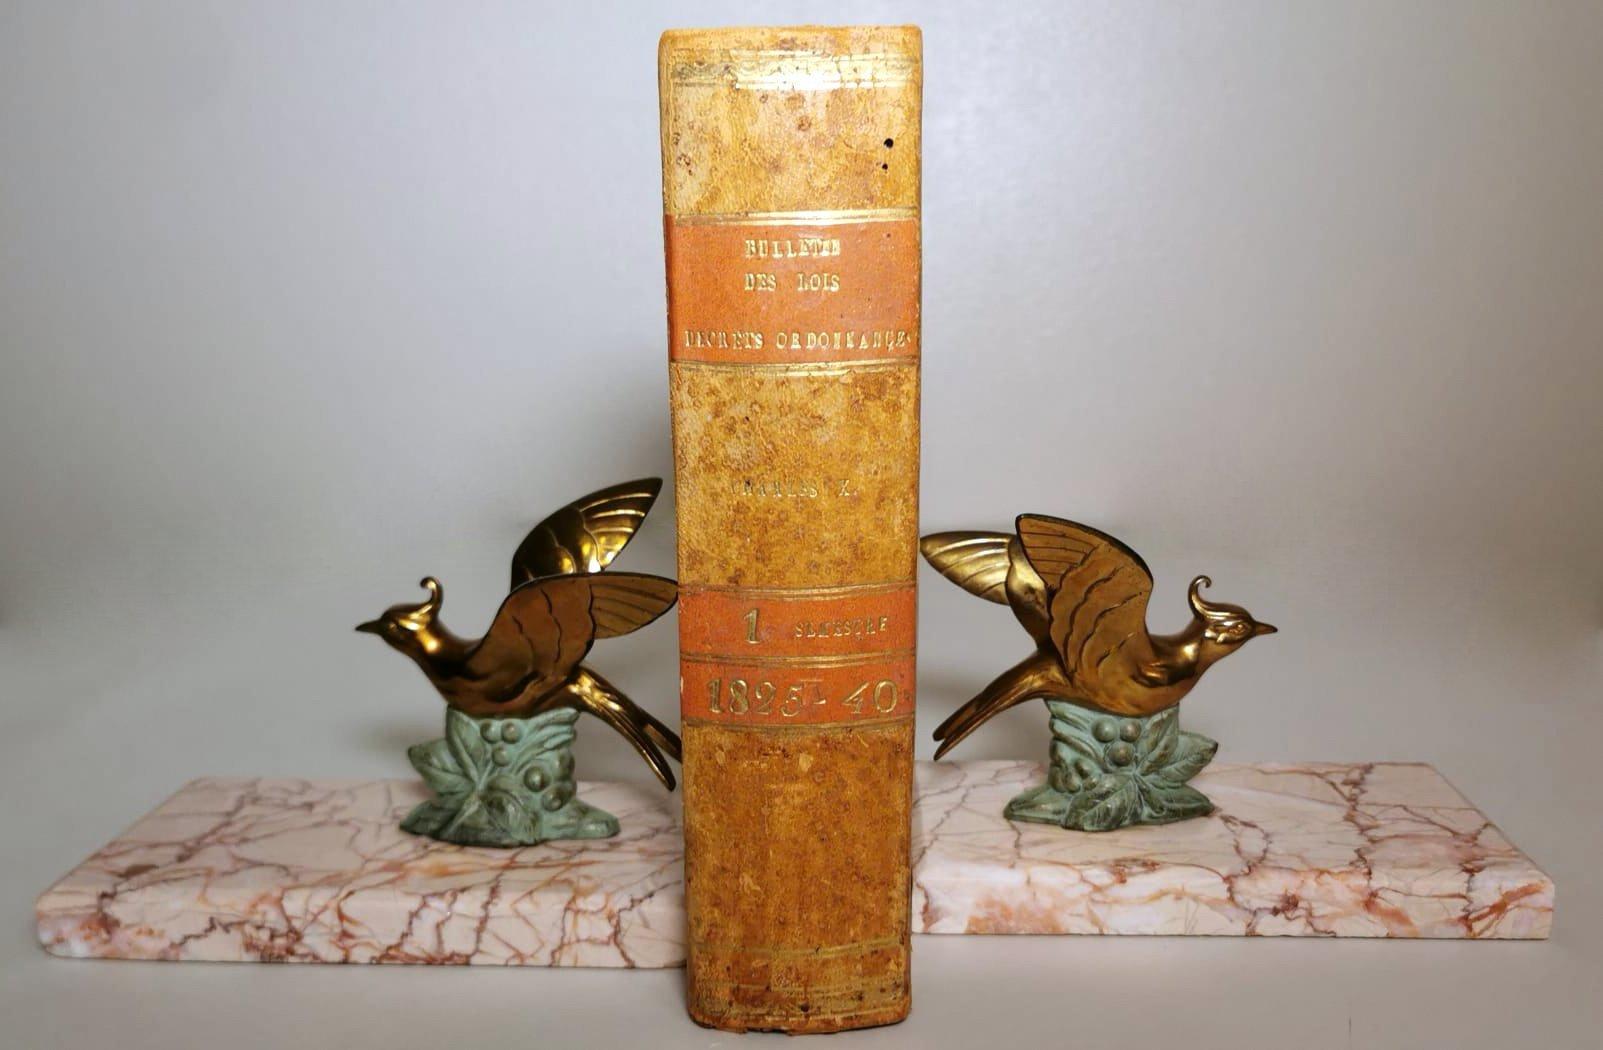 We kindly suggest you read the whole description, because with it we try to give you detailed technical and historical information to guarantee the authenticity of our objects.
Peculiar and original pair of bookends birds in Art Deco style; they